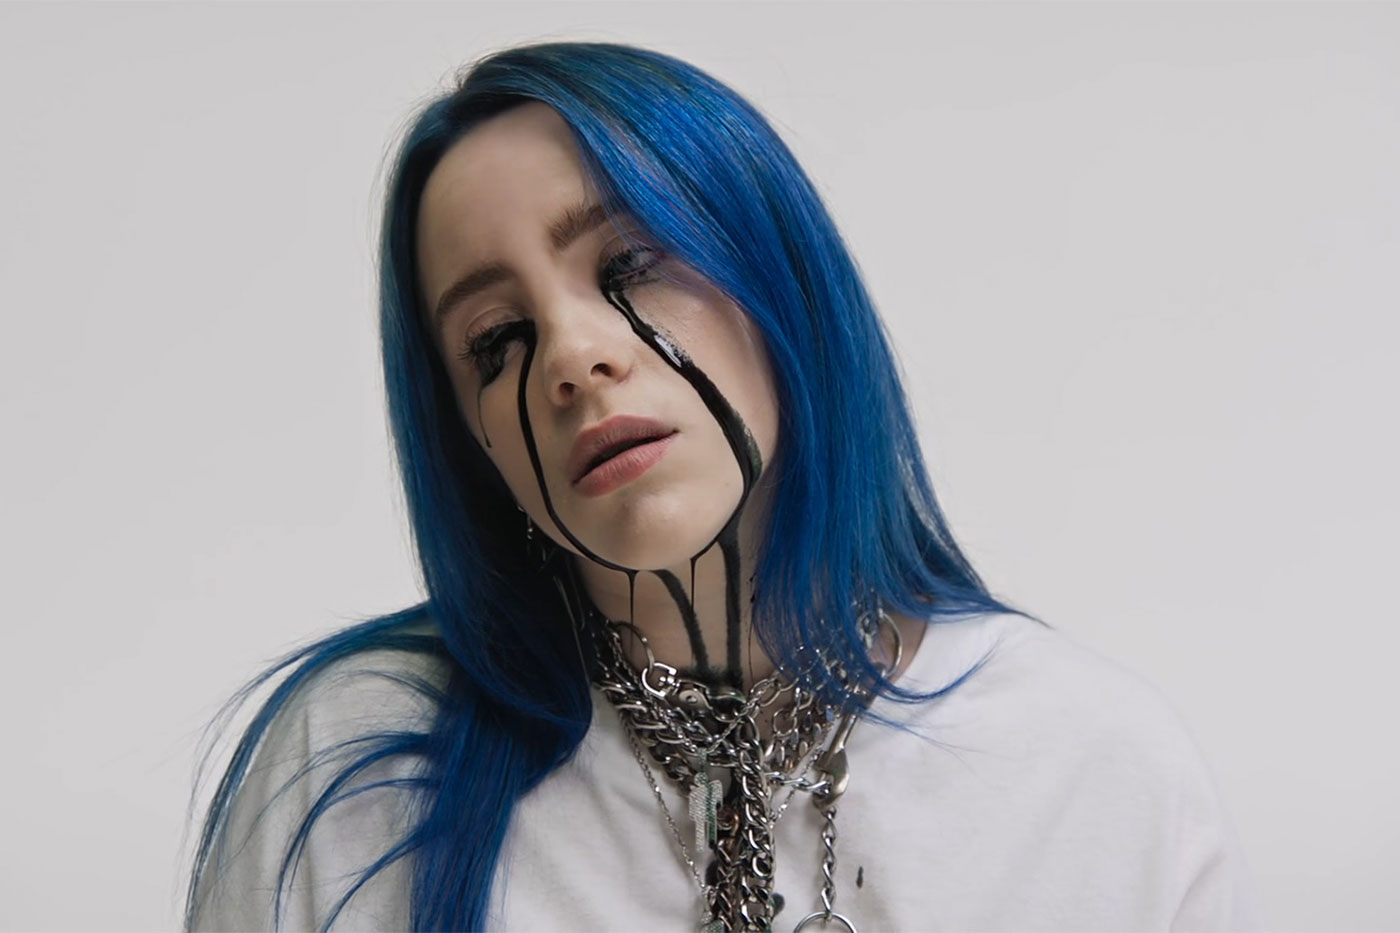 Billie Eilish's blue hair and outfit at the 2019 Lollapalooza Music Festival - wide 8